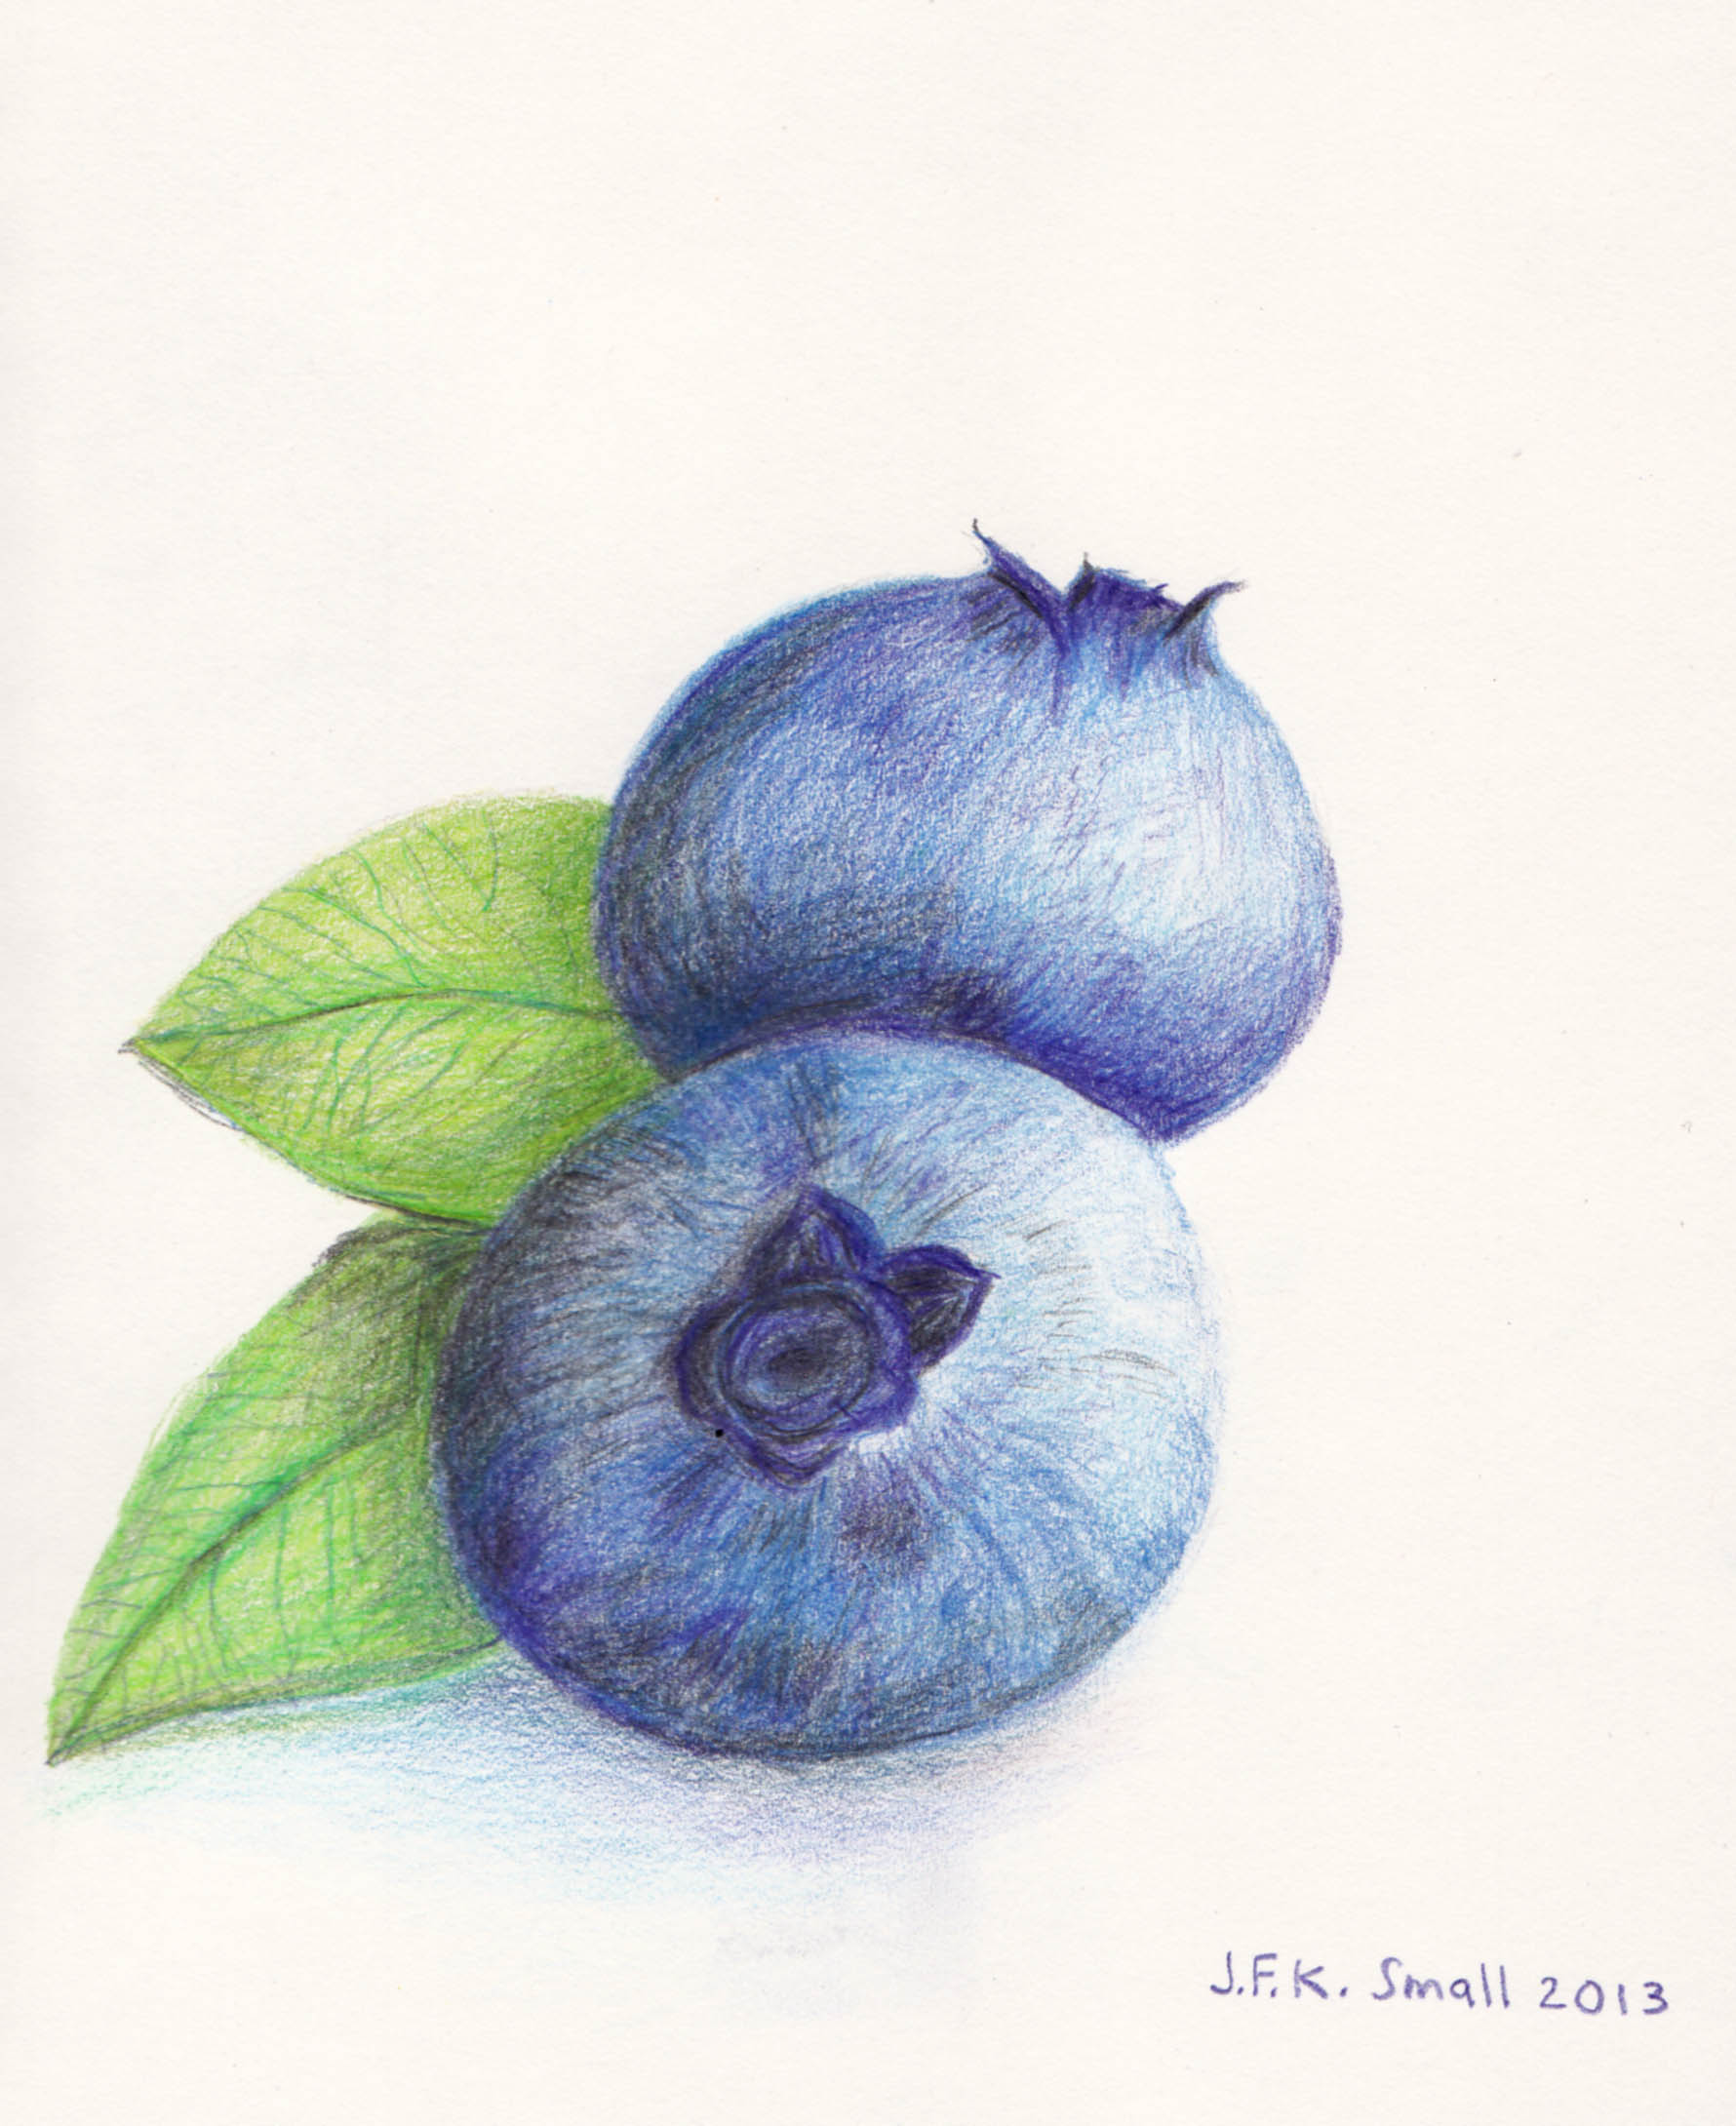 12300 Blueberry Drawing Stock Photos Pictures  RoyaltyFree Images   iStock  Blueberry illustration